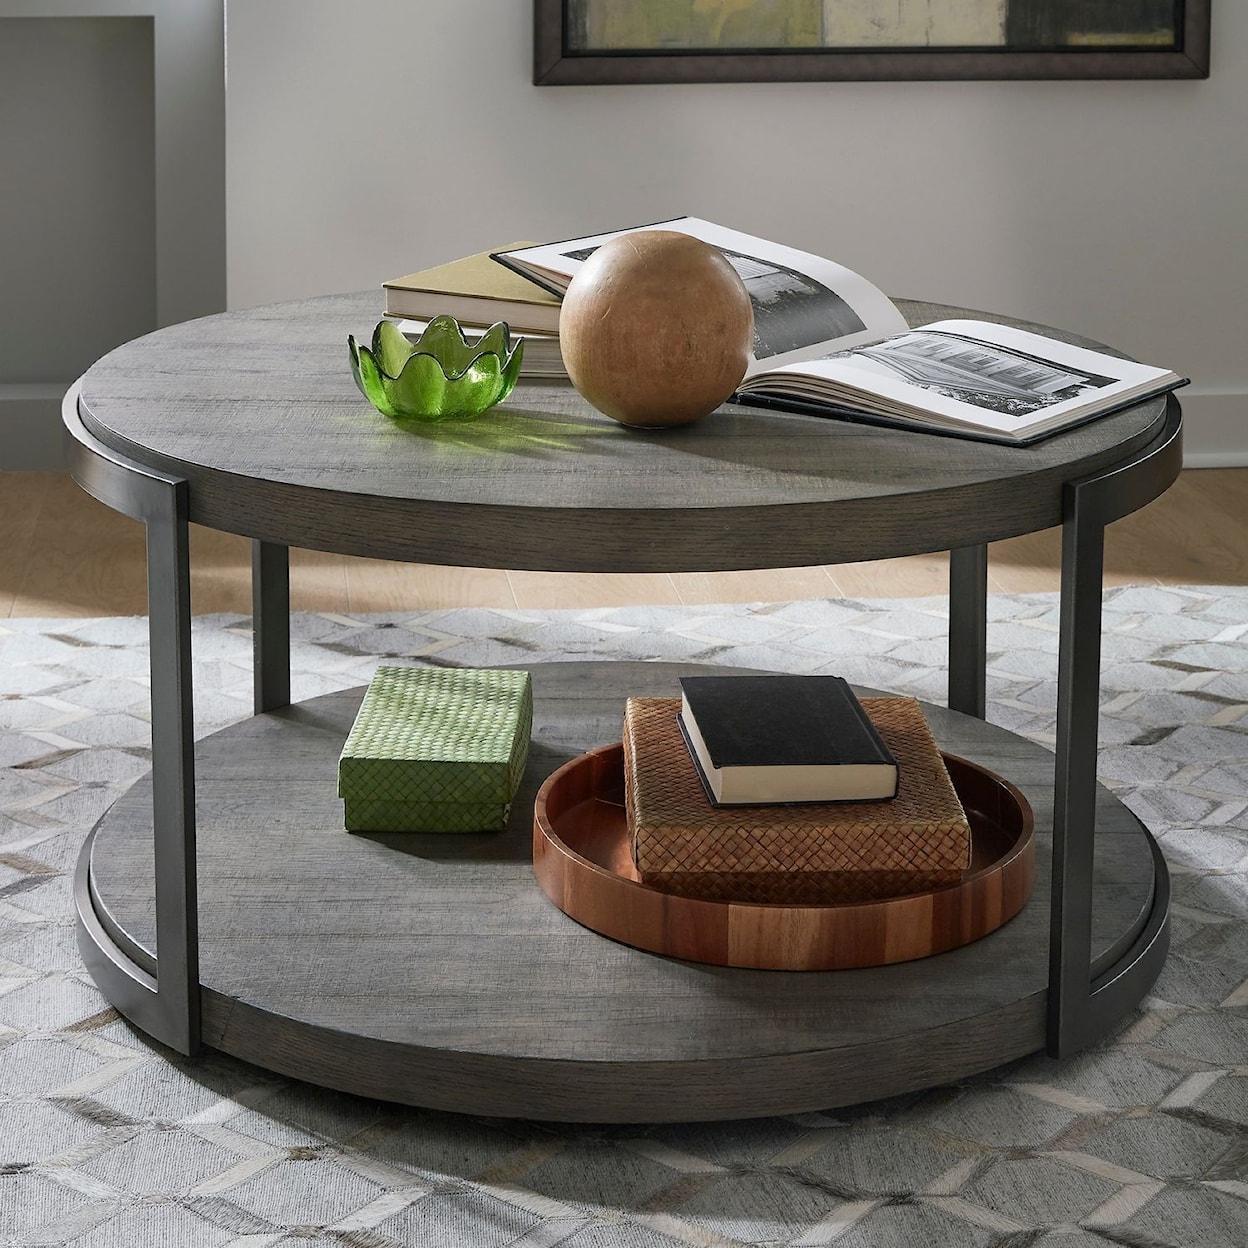 Freedom Furniture Modern View Round Cocktail Table